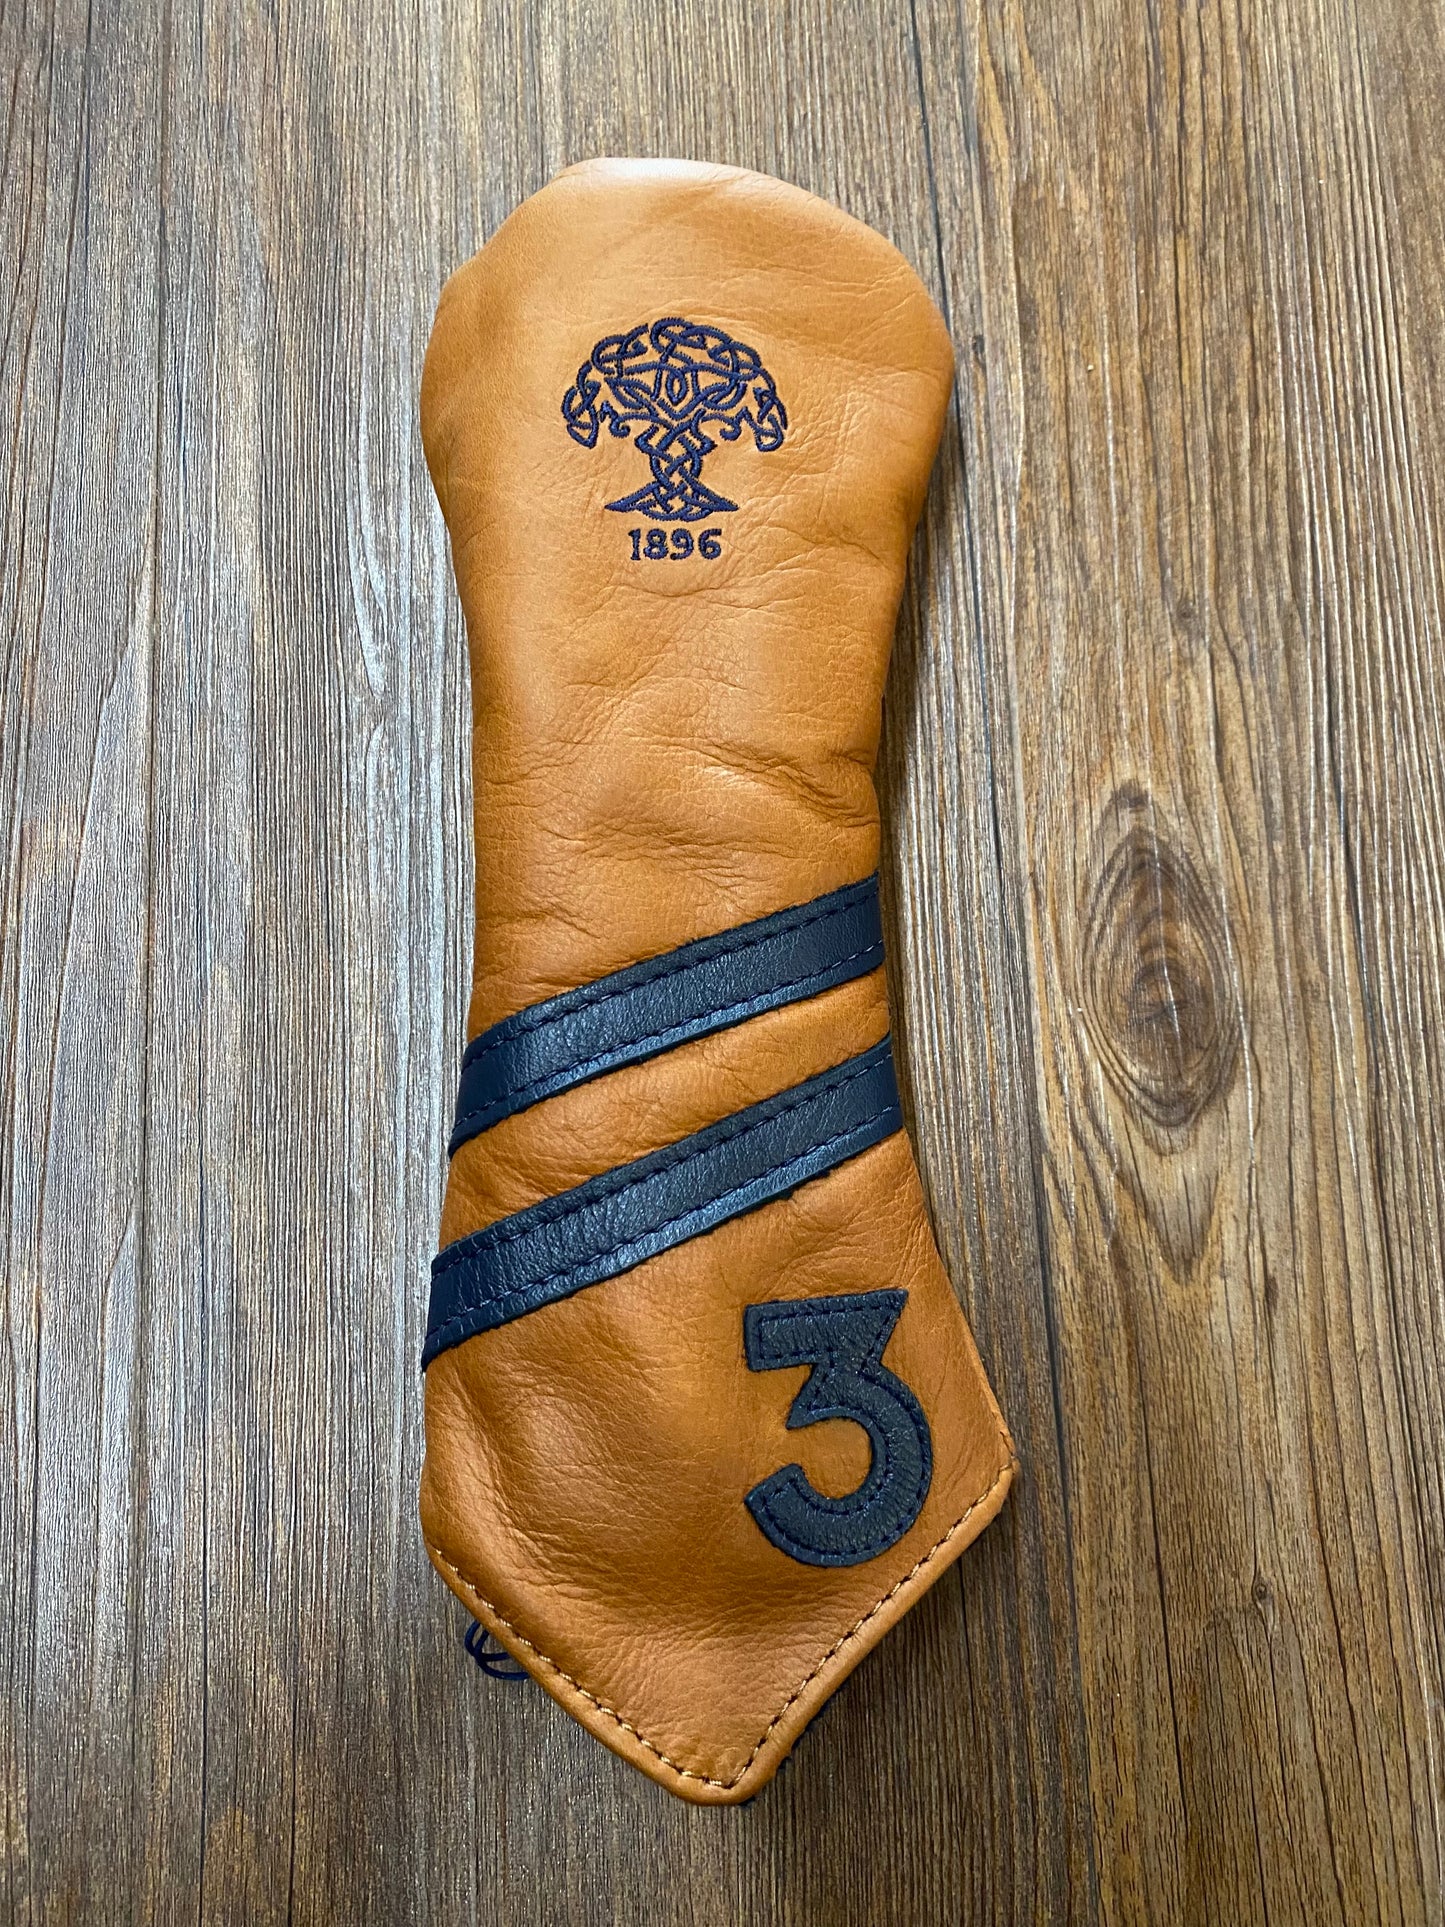 Links & Kings Leather Stipe Headcover